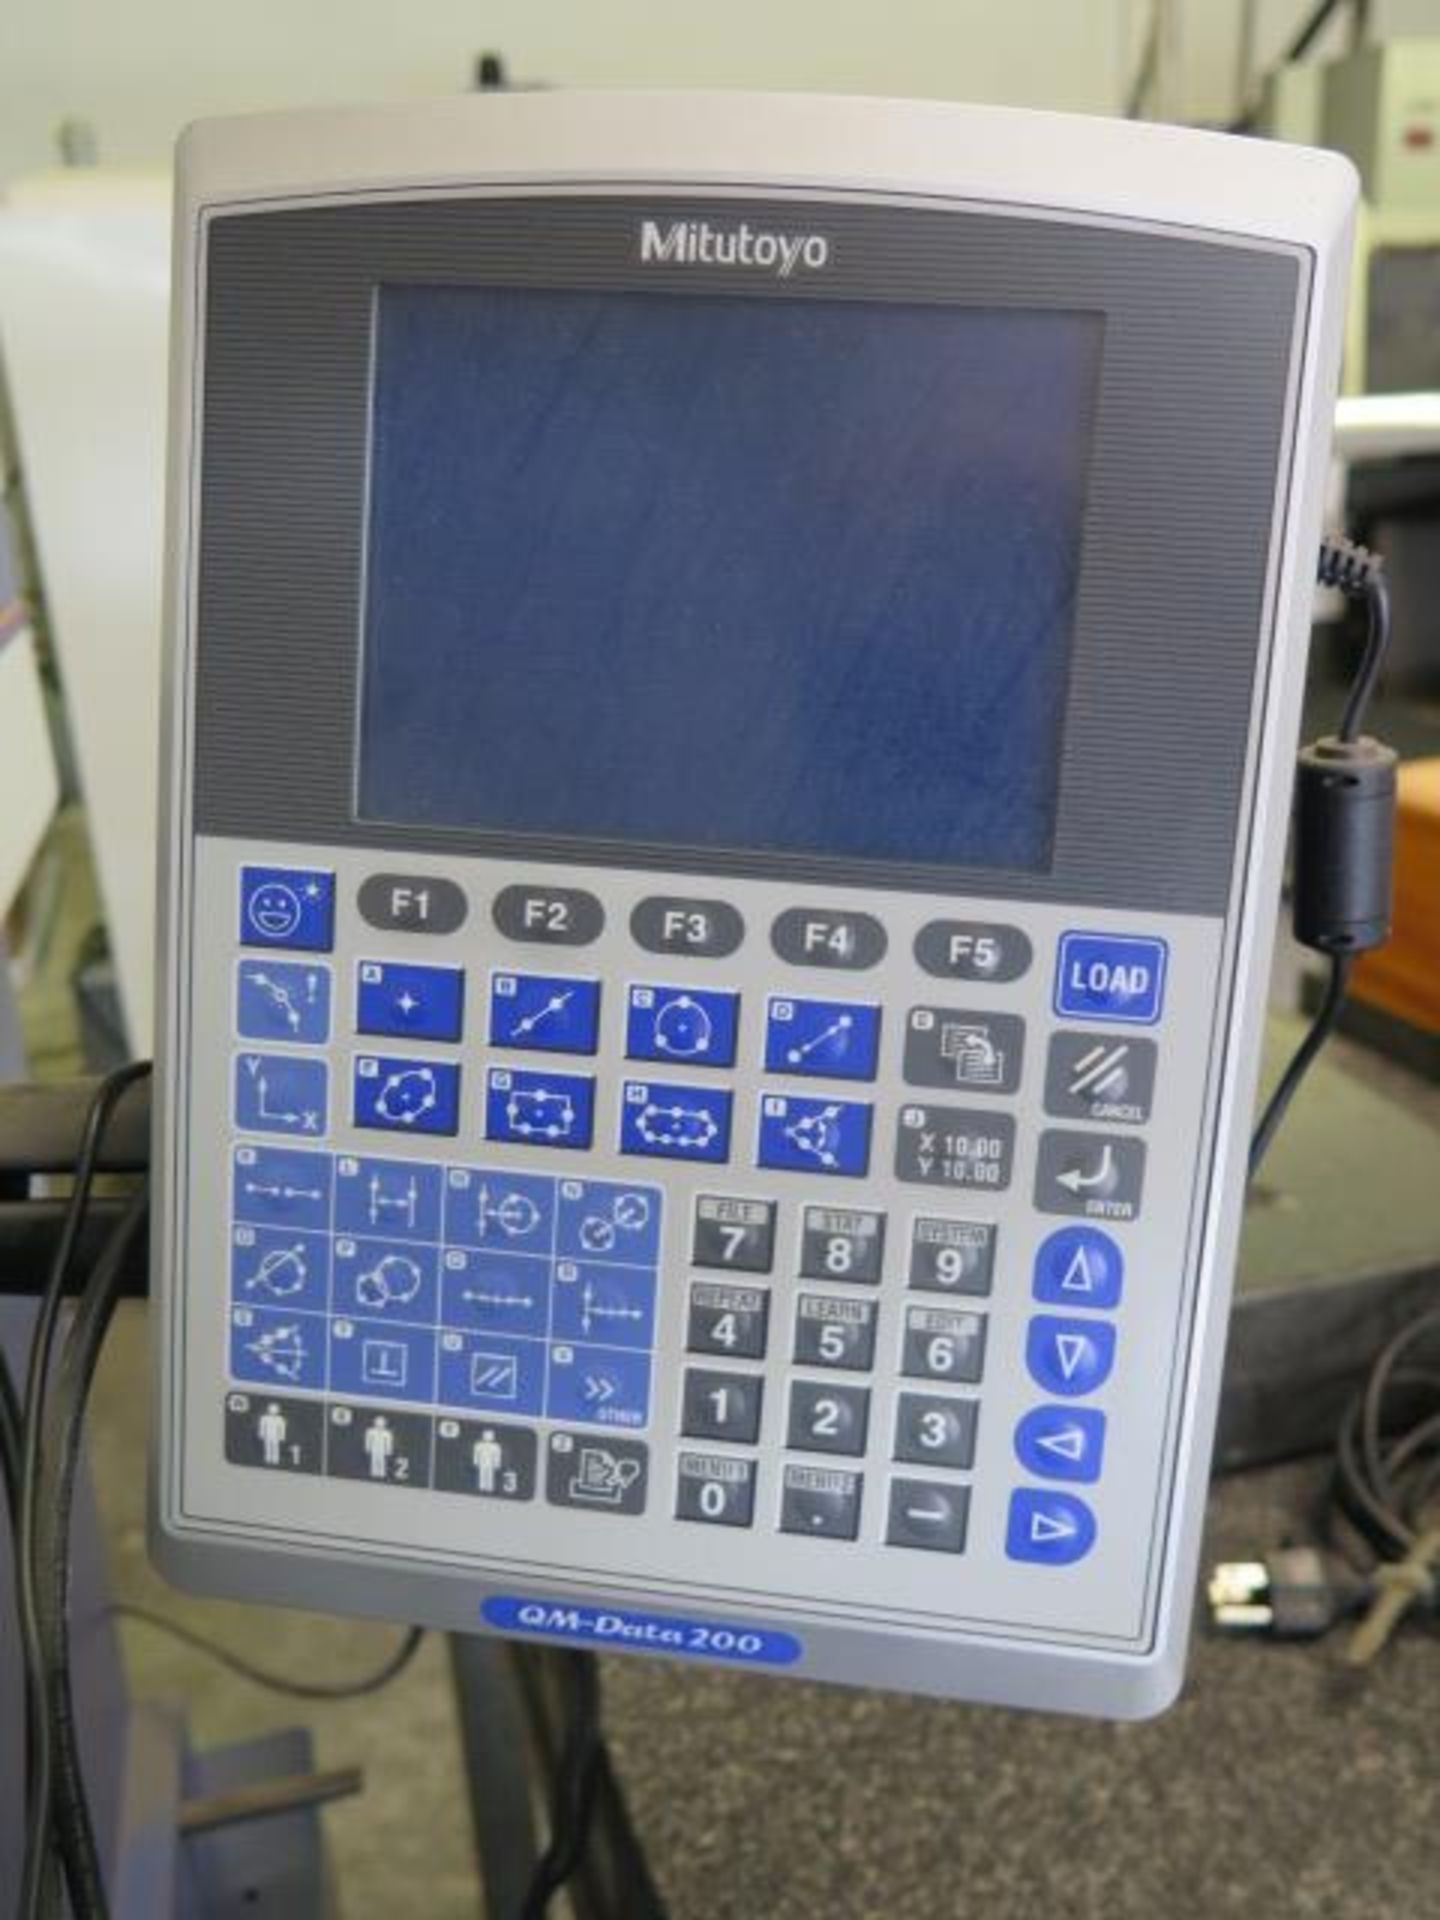 Mitutoyo PH-A14 14” Optical Comparator s/n 507019 w/ QM-DATA200 Programmable DRO, SOLD AS IS - Image 4 of 15